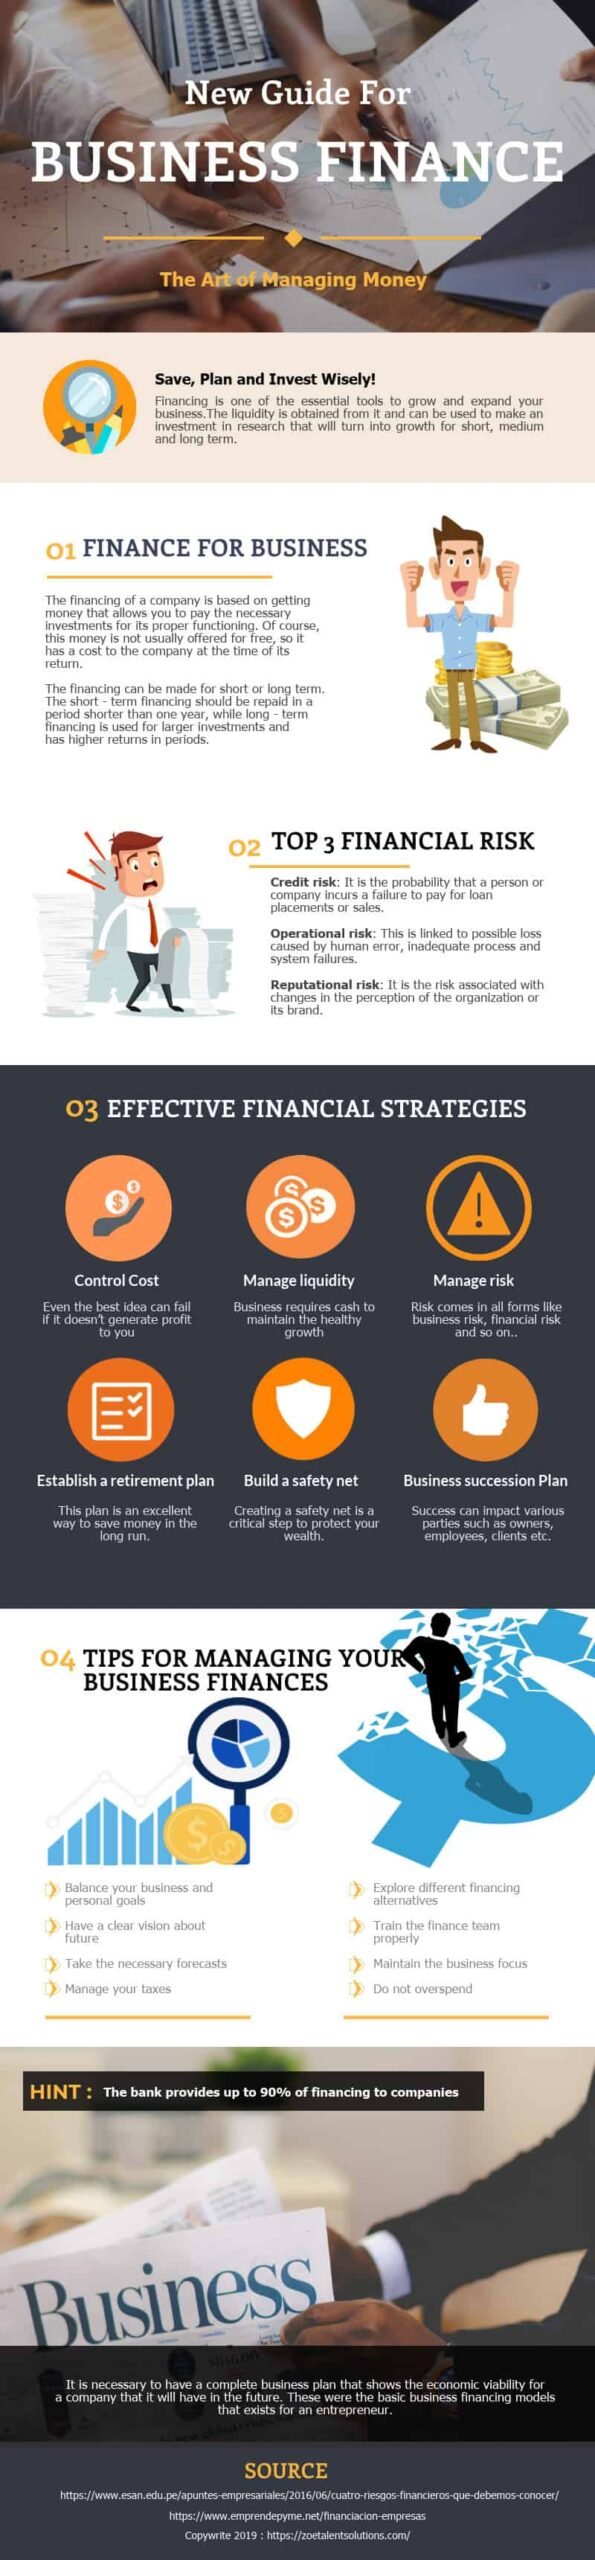 Business Finance Guide Infographic